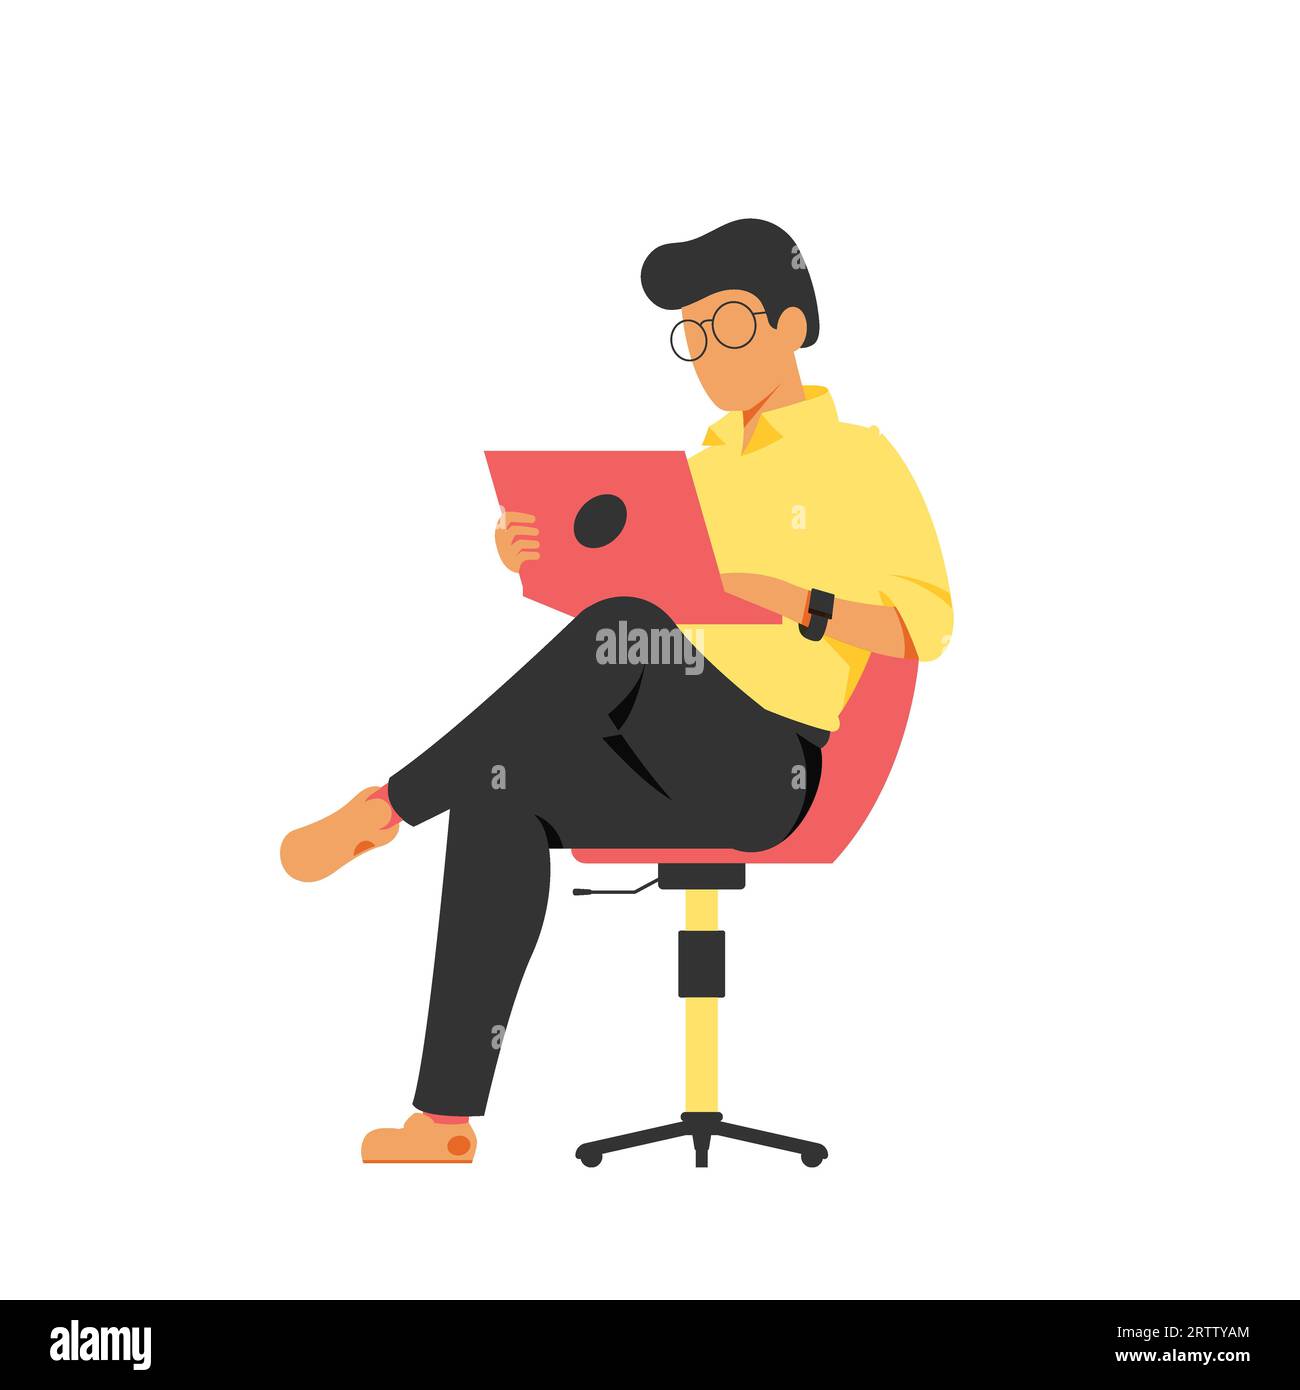 Illustration of a man sitting on a chair and using a laptop. Flat style vector for business conceptual design Stock Vector